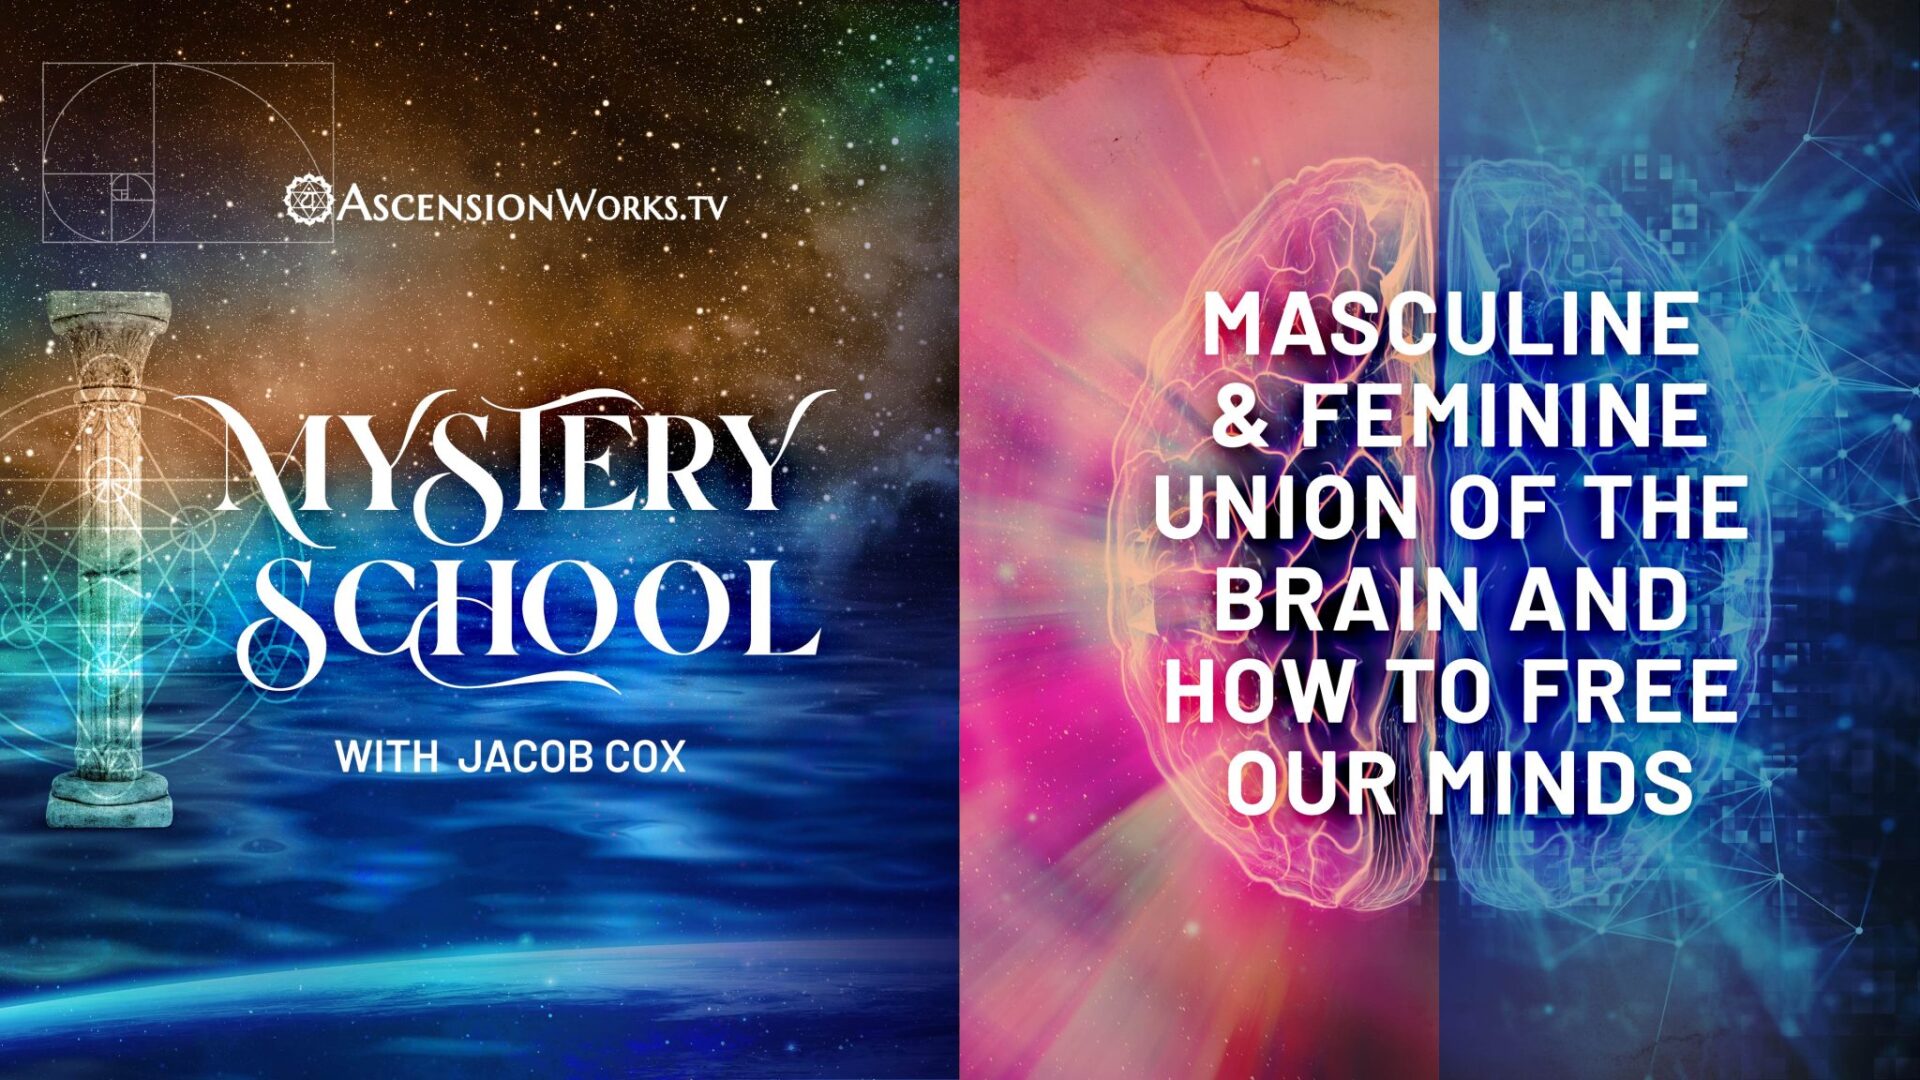 Mystery School - Discussing Masculine & FeminineUnion of the Brain and How to Free our Minds